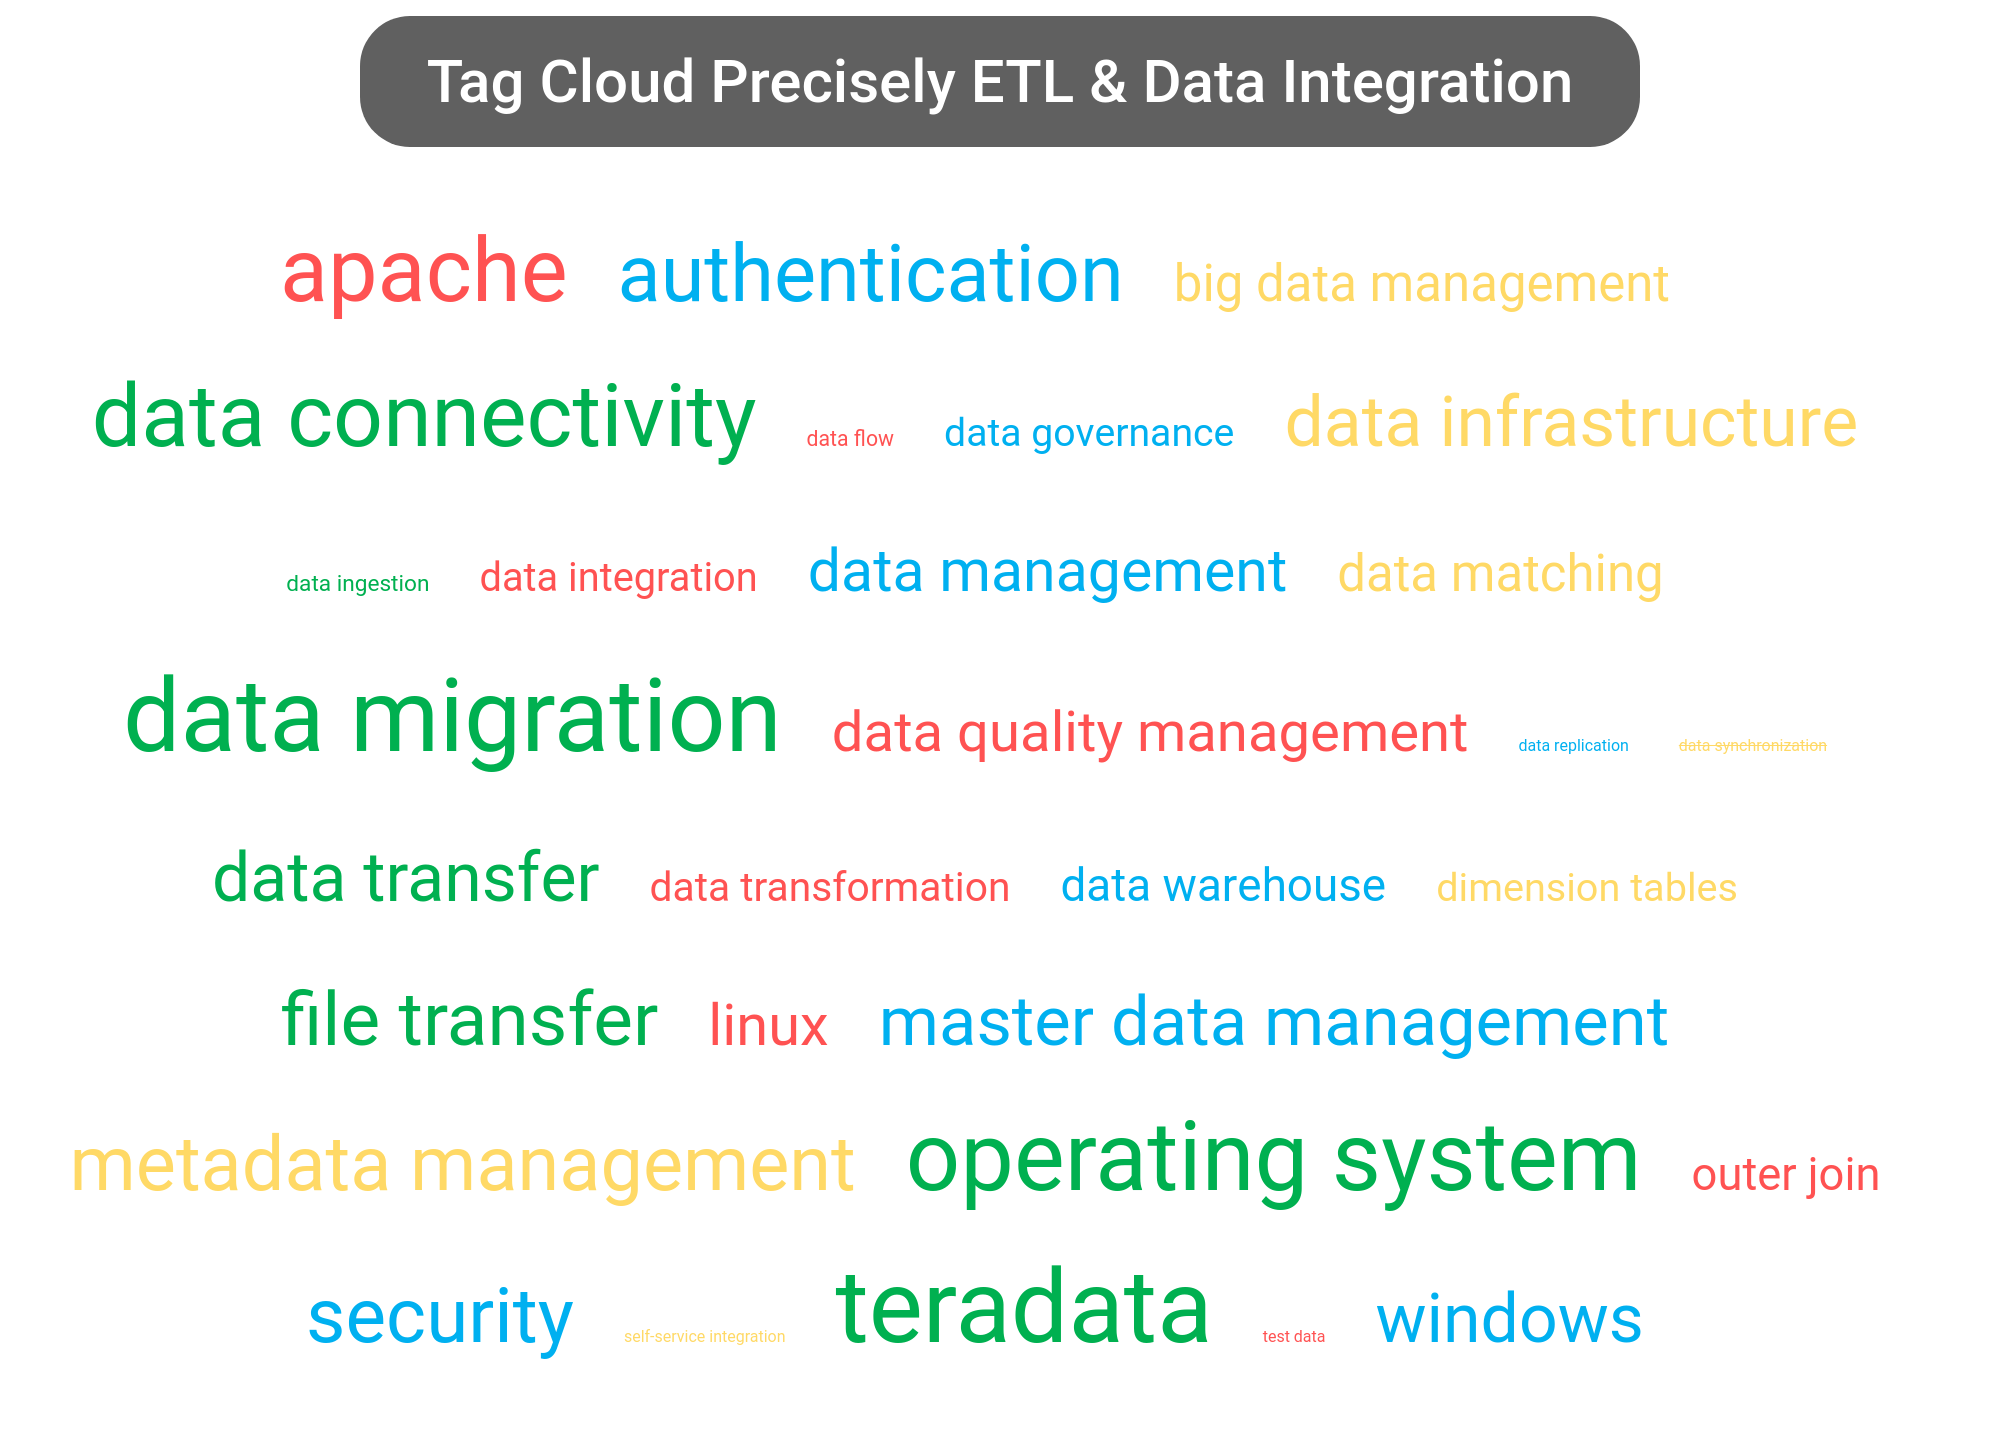 Tag cloud of the Precisely Data Integration software.